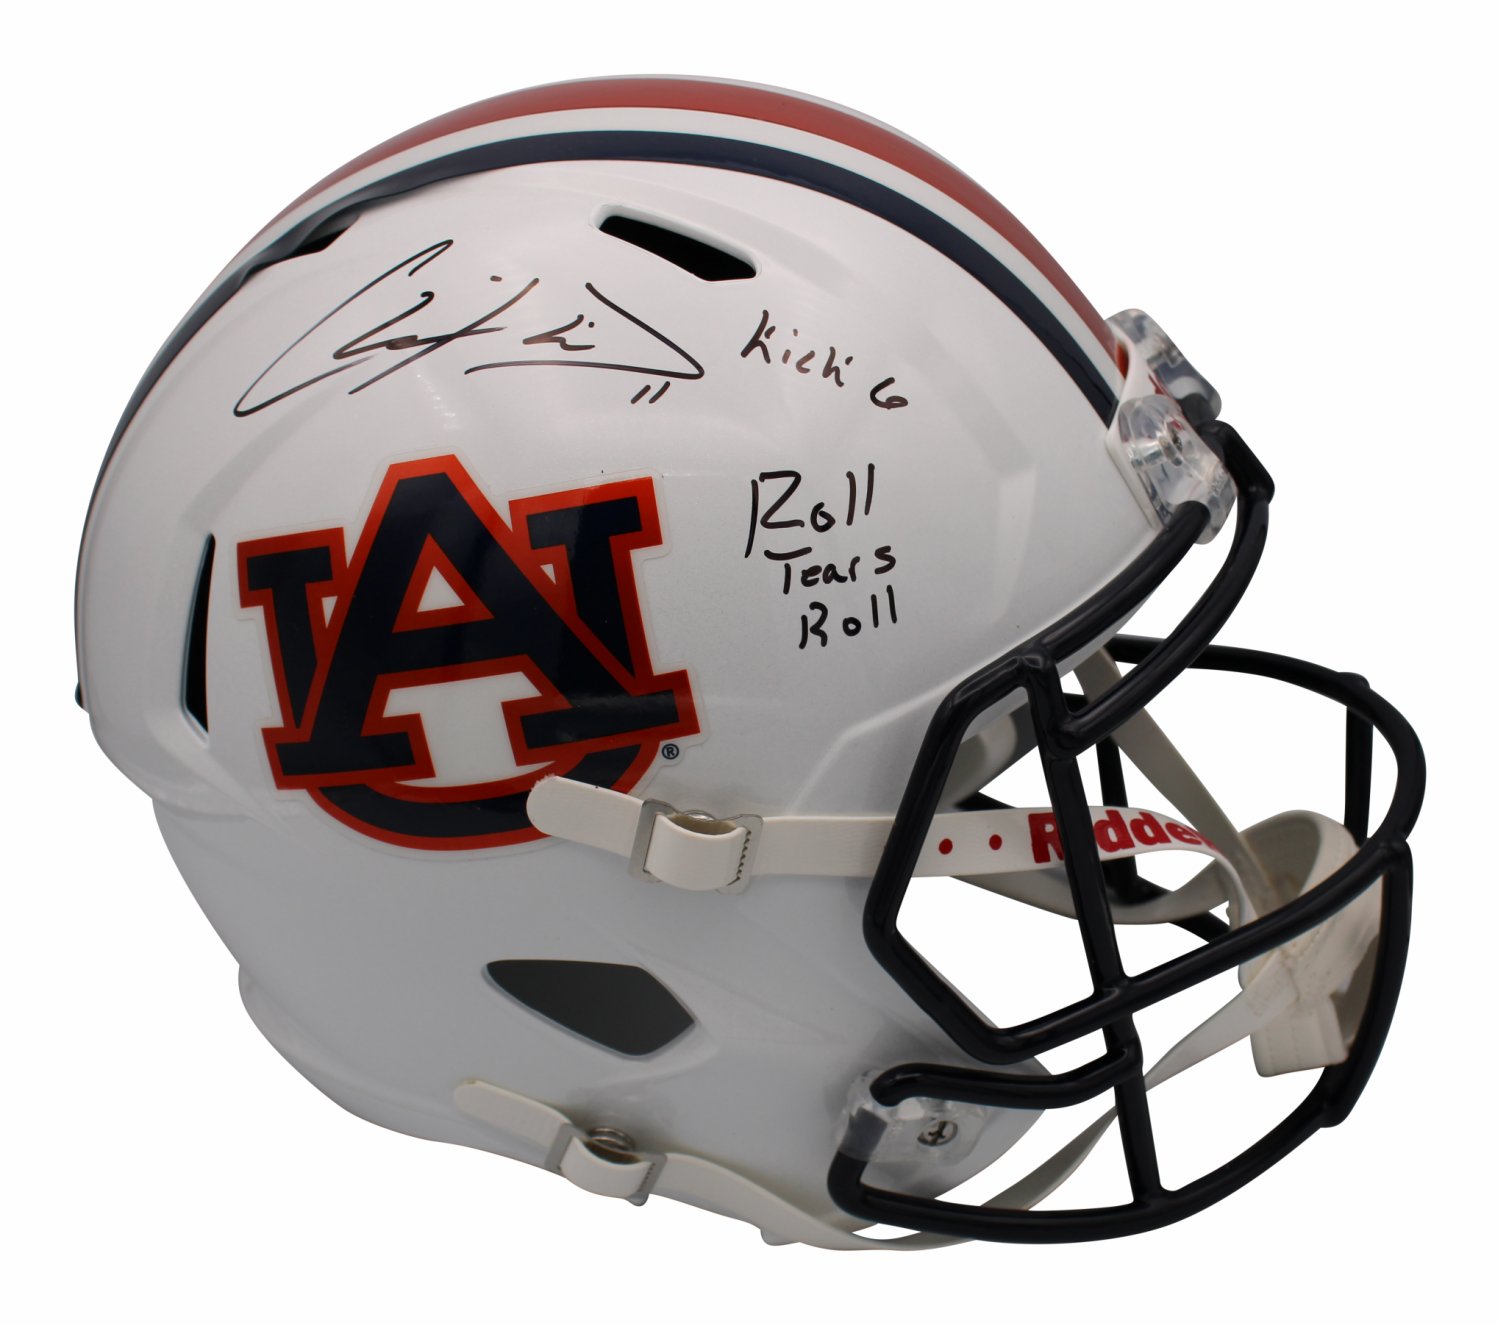 Chris Davis Autographed Signed Auburn Tigers Riddell Full Size Speed  Replica Helmet with Roll Tears Roll Inscription - Certified Authentic